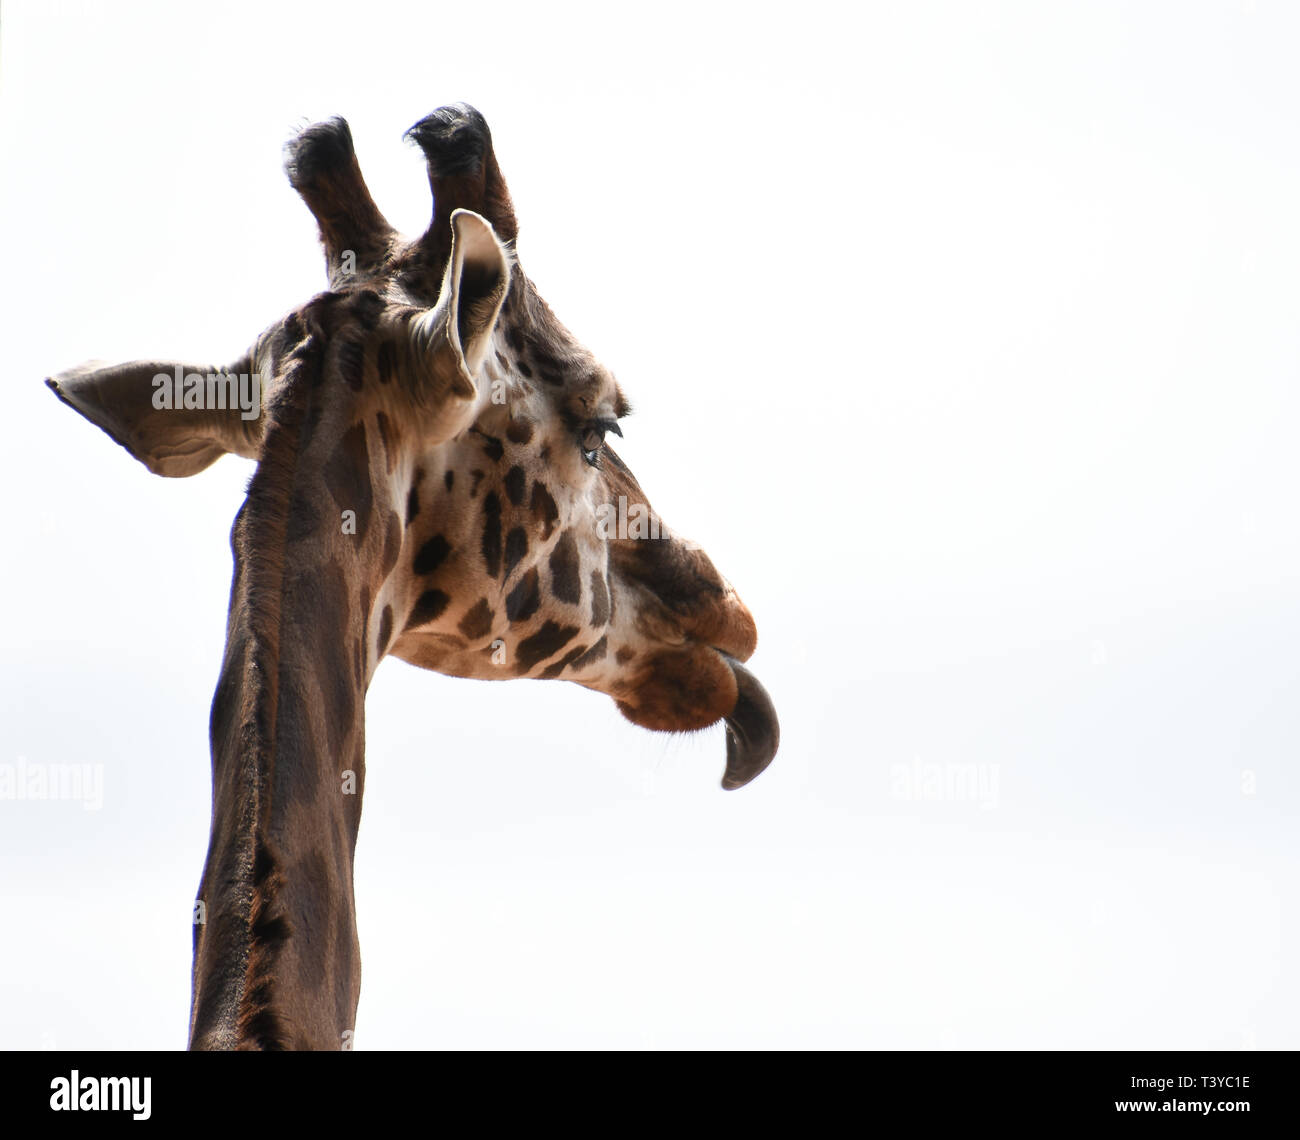 The head of a giraffe with its tongue out against a white background Stock Photo